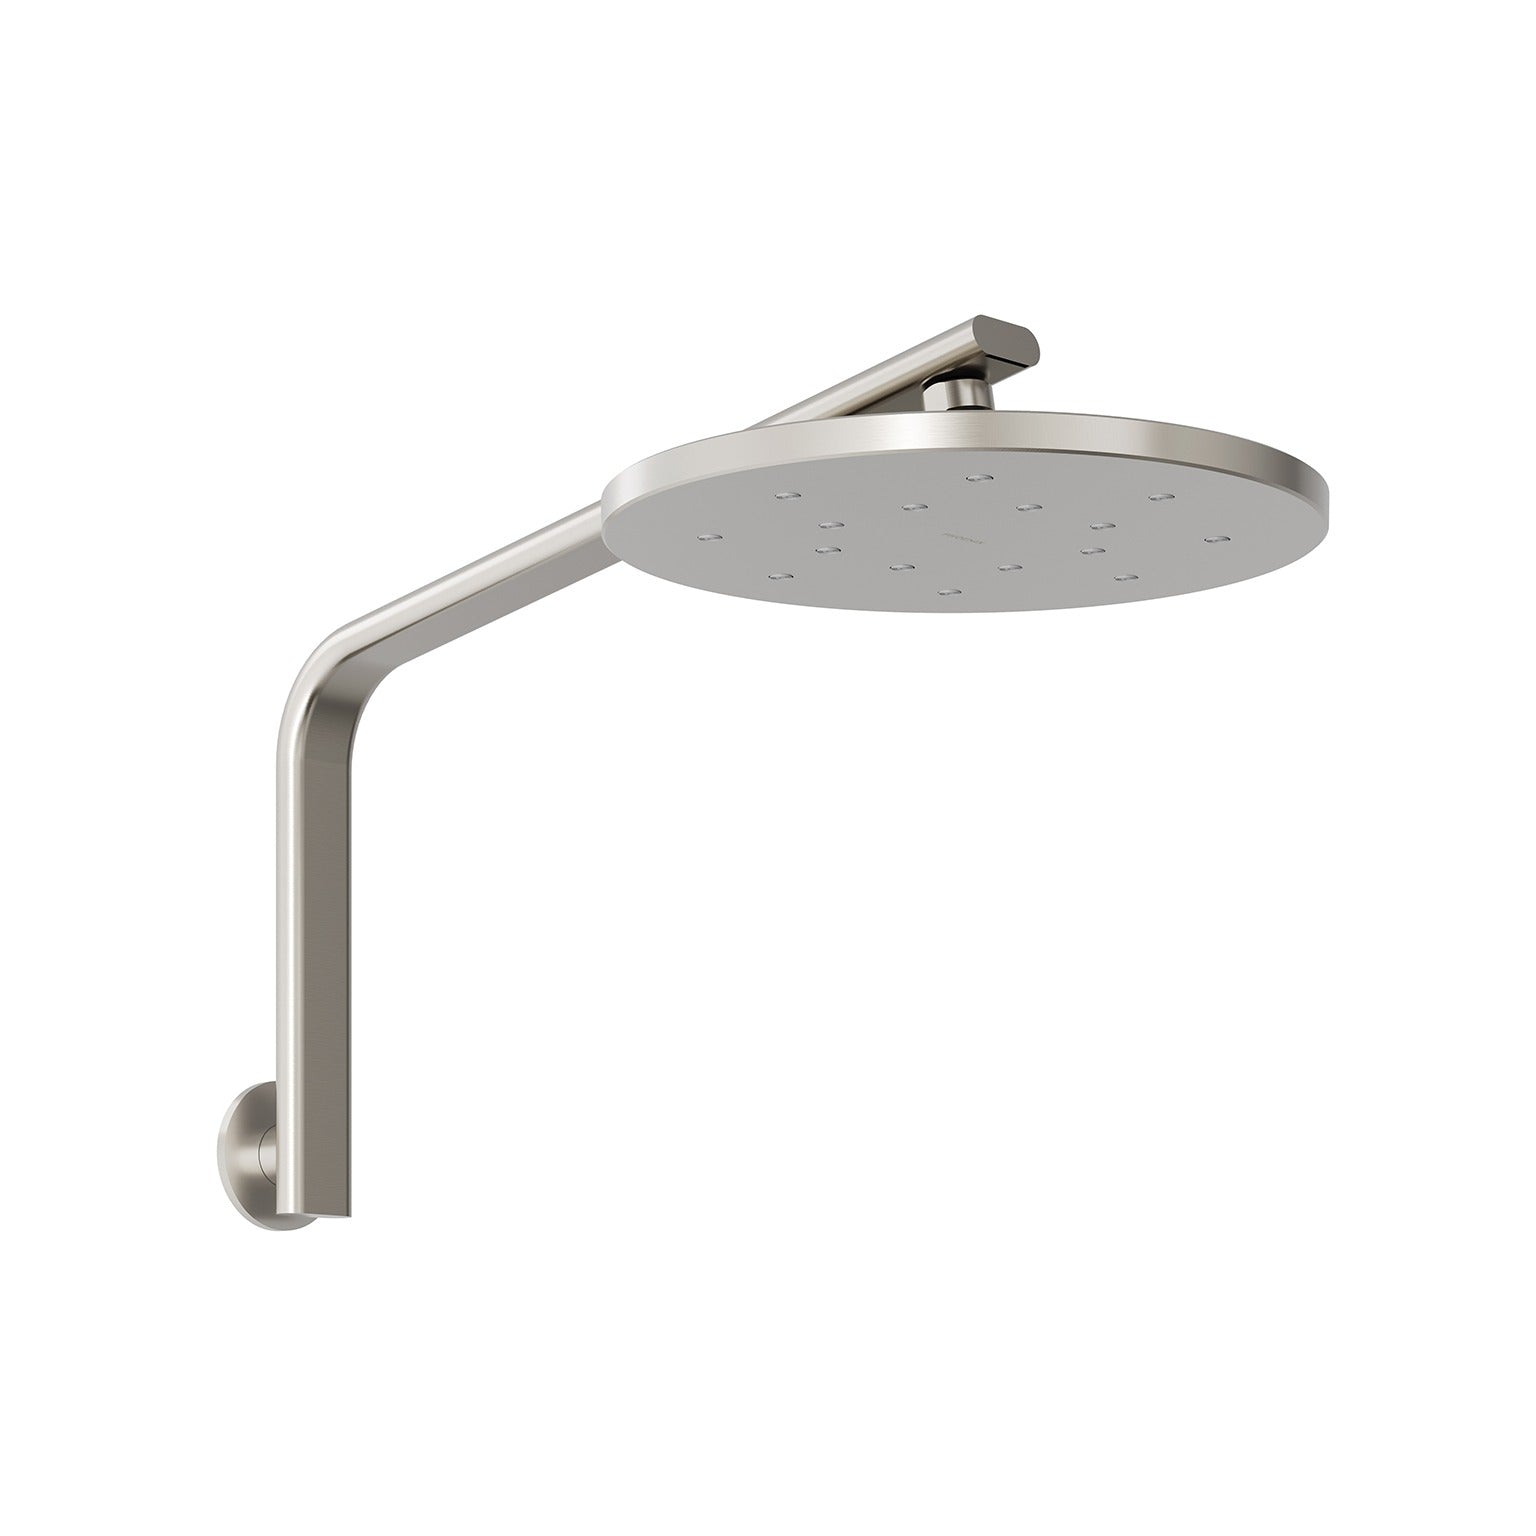 PHOENIX OXLEY HIGH-RISE SHOWER ARM AND ROSE BRUSHED NICKEL